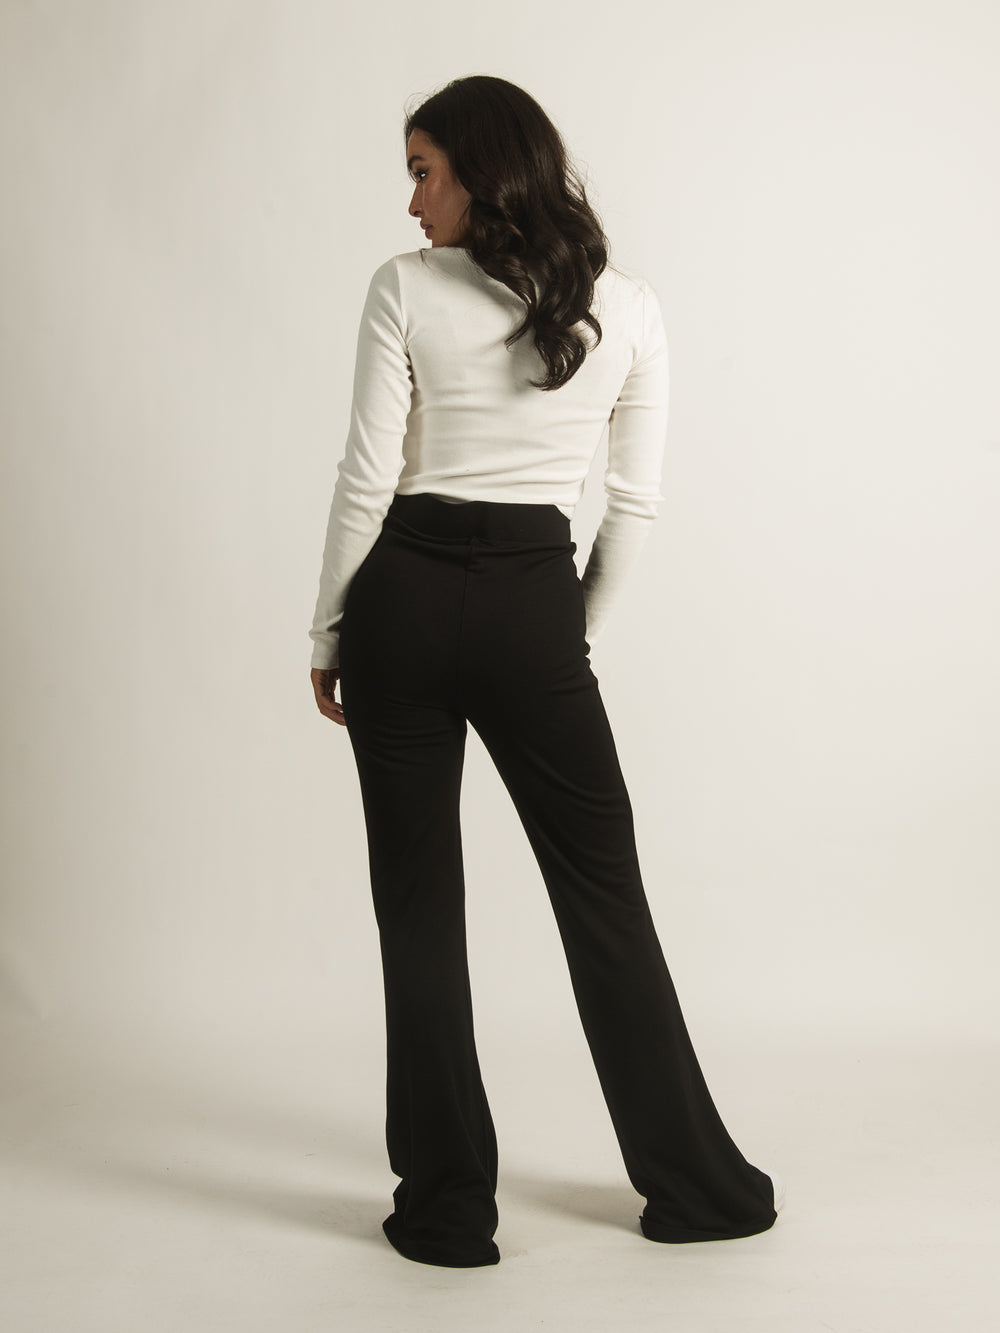 26 Best Black ribbed trousers outfits ideas  flared pants outfit, black  flare pants, outfits